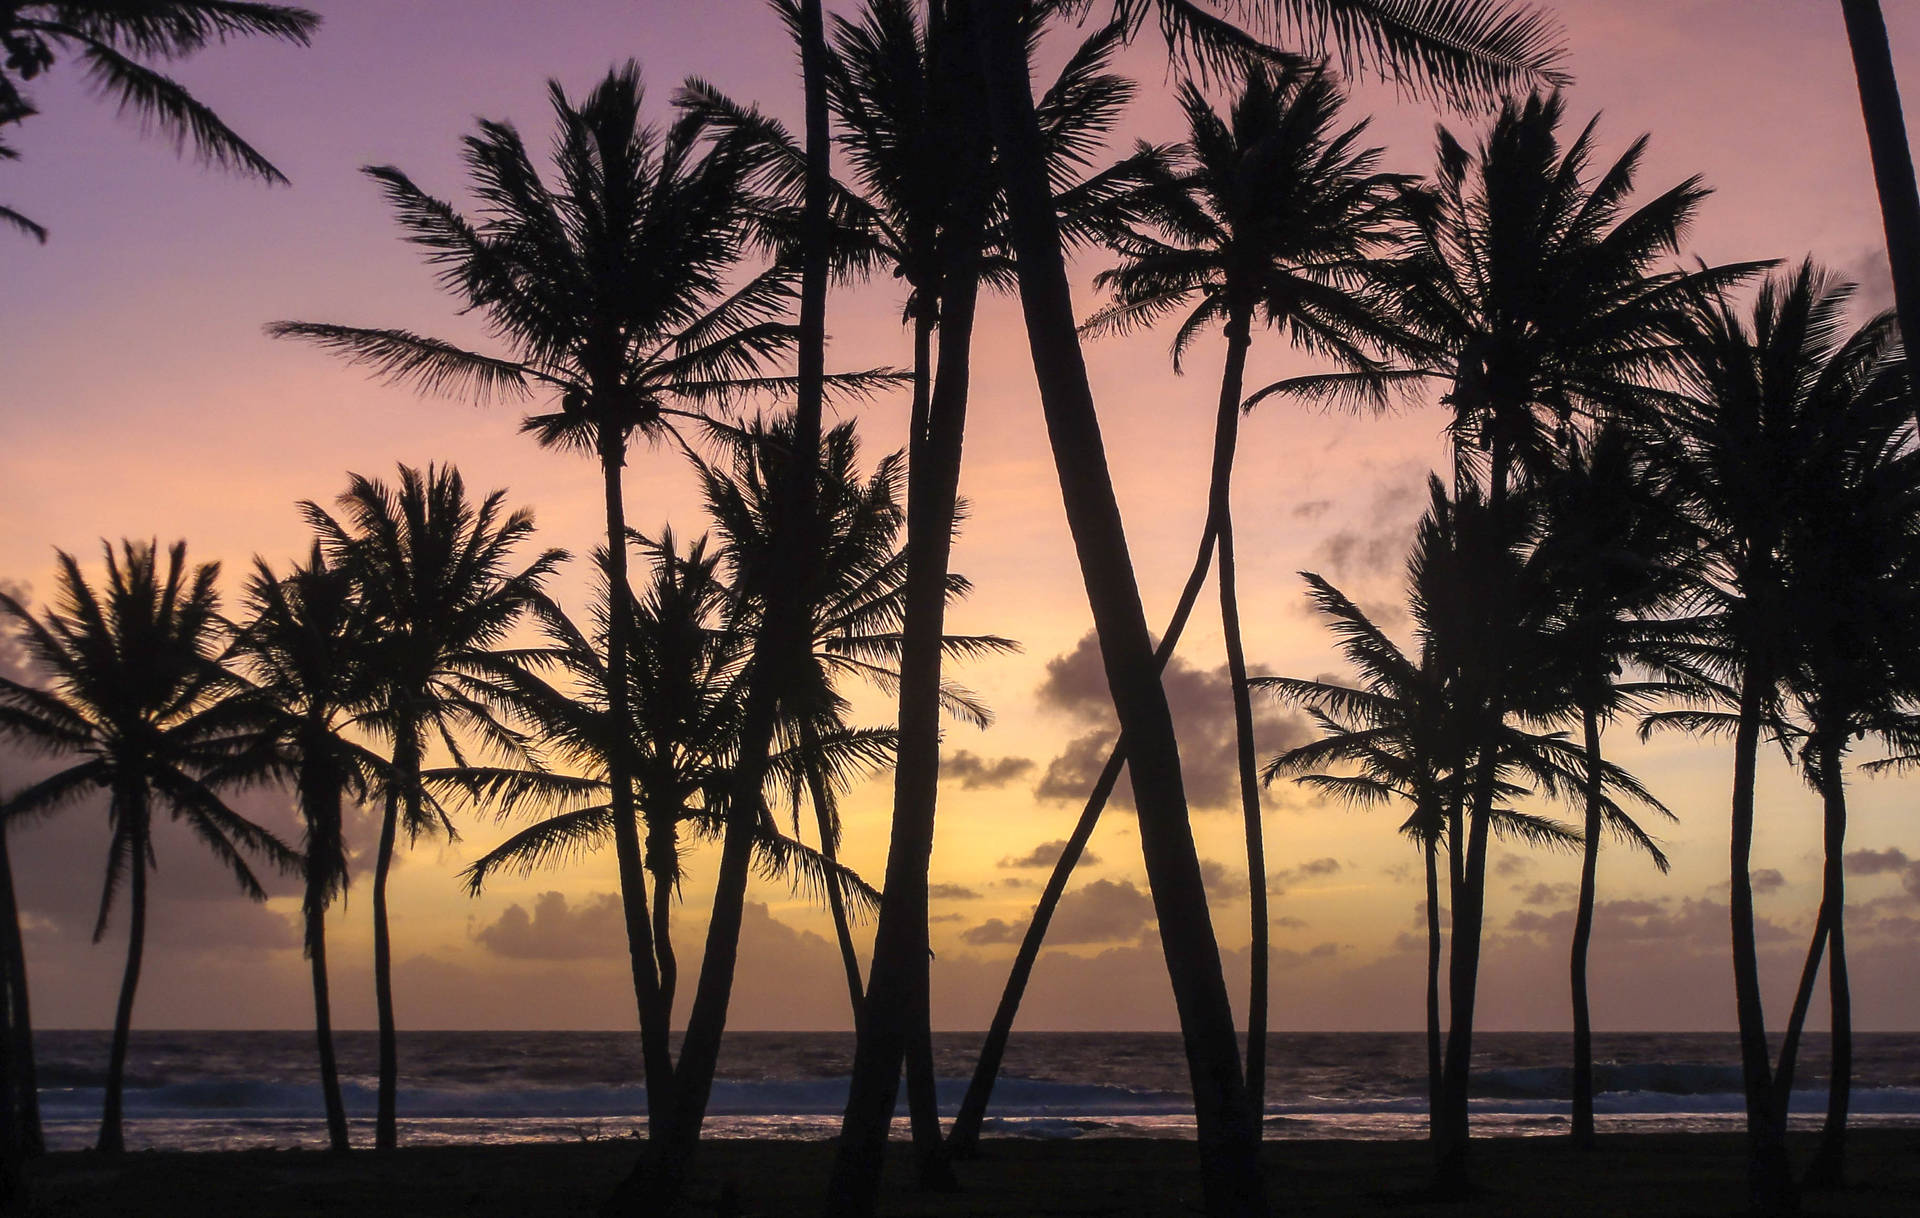 Pine Trees At Sunset In Marshall Islands